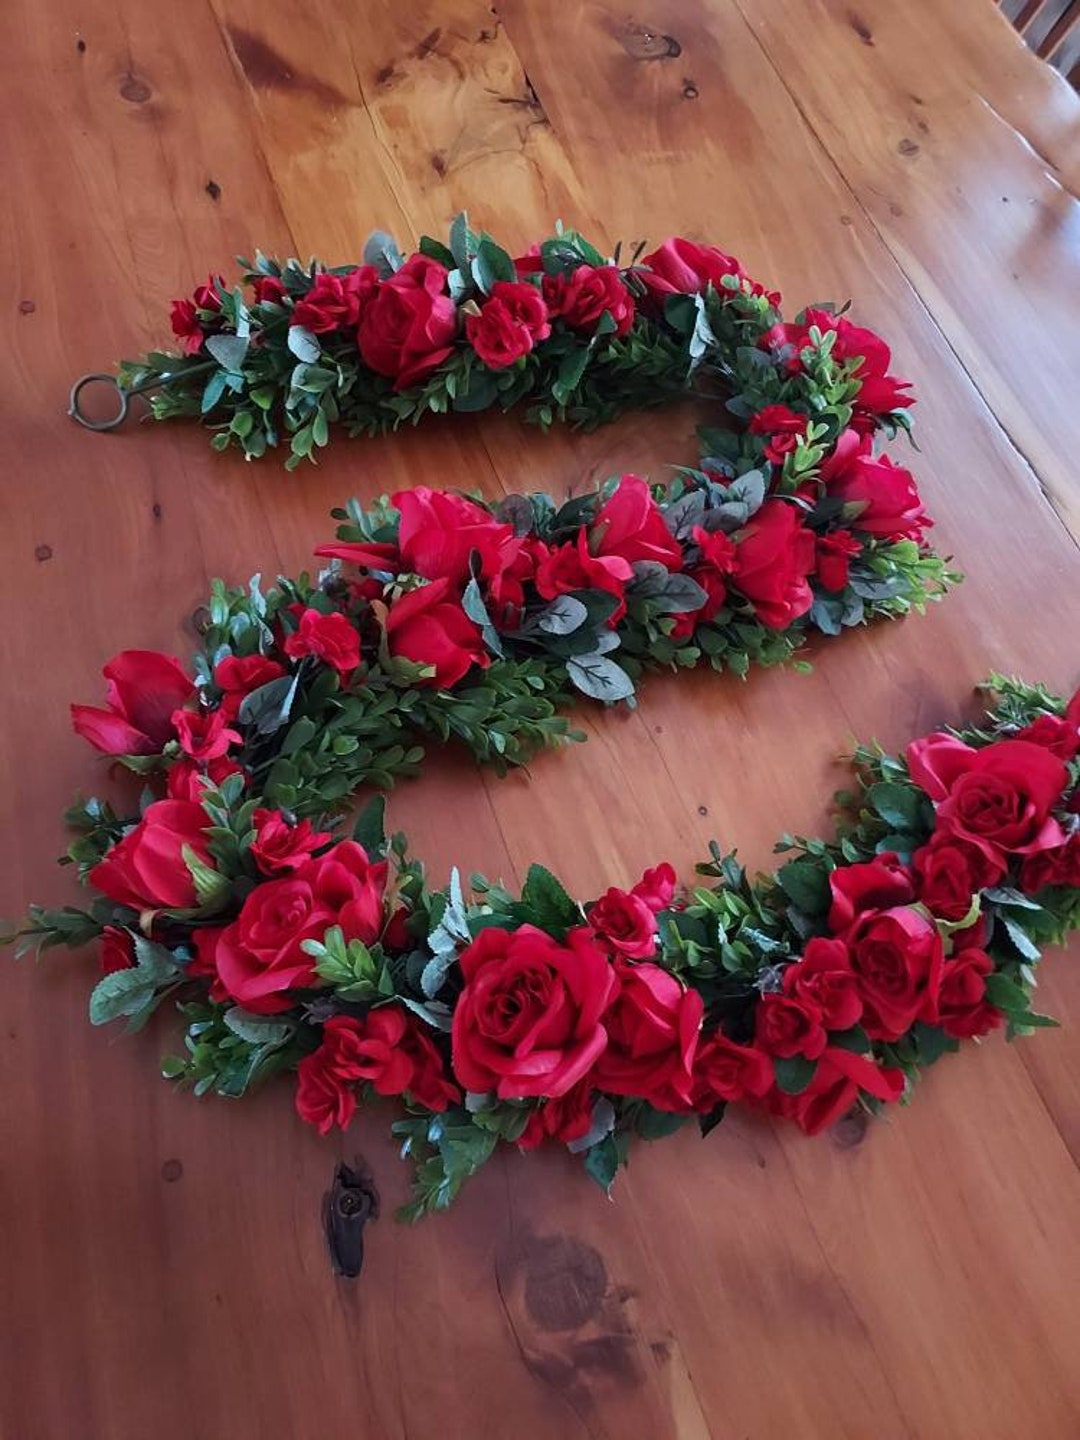 Red and white heart wreath arranged by a florist in Ocala, FL